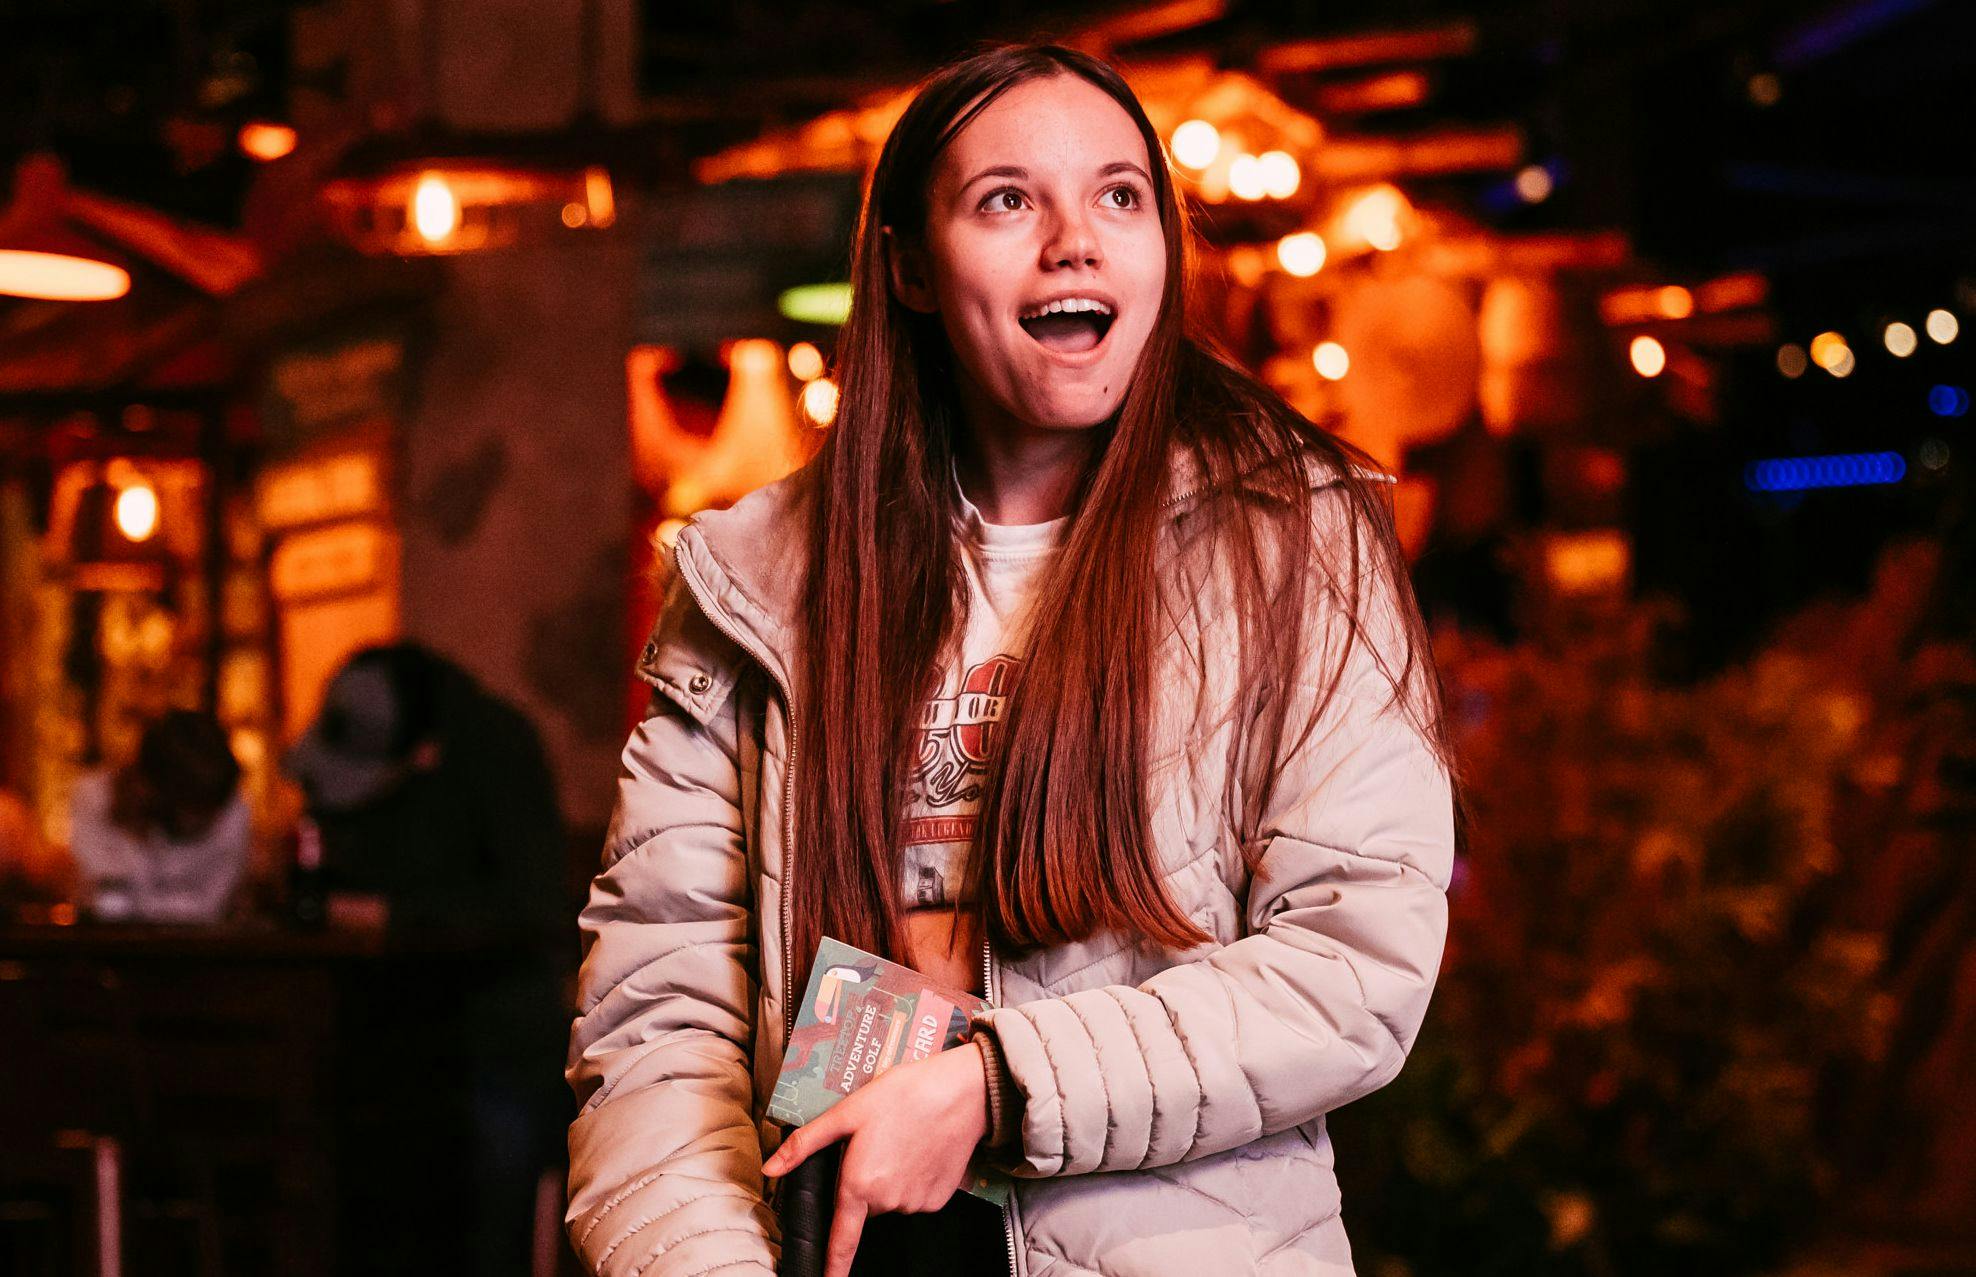 Happy girl with long hair looks around with her mouth open in awe at the Treetop adventure golf sights, wearing a nude puffer jacket. 